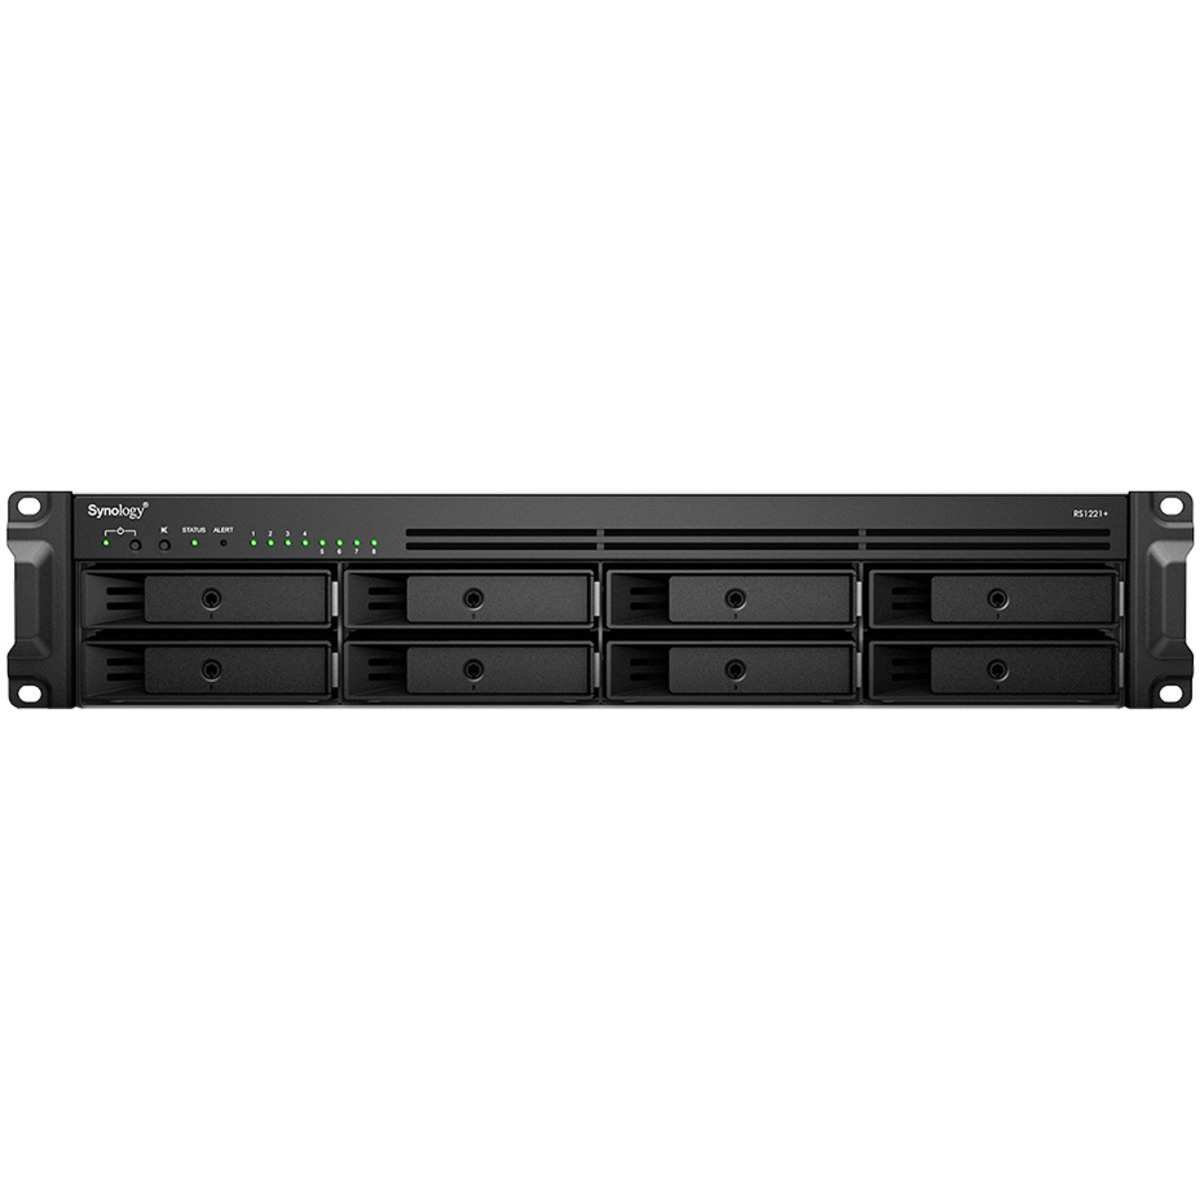 buy $2561 Synology RackStation RS1221RP+ 16tb RackMount NAS - Network Attached Storage Device 8x2000gb Seagate BarraCuda ST2000DM008 3.5 7200rpm SATA 6Gb/s HDD CONSUMER Class Drives Installed - Burn-In Tested - ON SALE - nas headquarters buy network attached storage server device das new raid-5 free shipping usa christmas new year holiday sale RackStation RS1221RP+